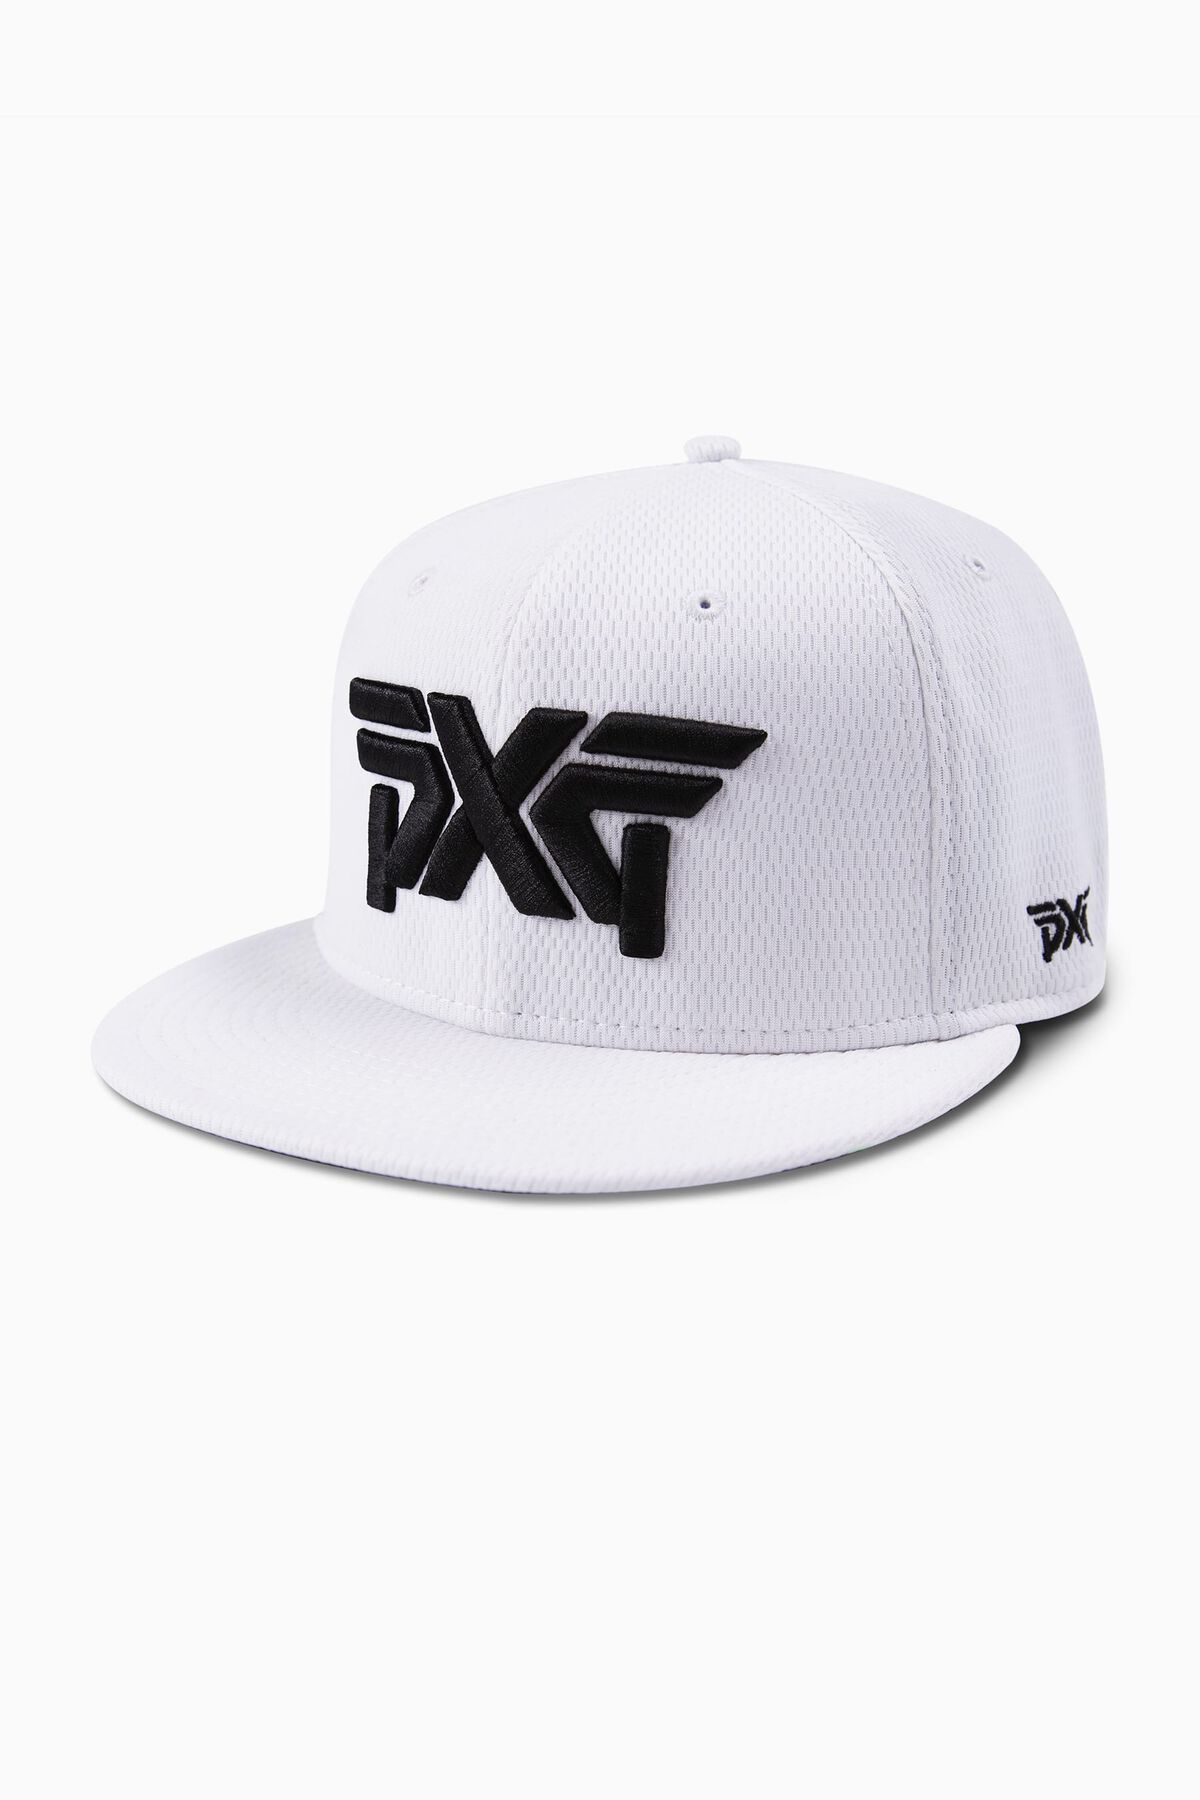 Performance 59FIFTY Fitted Cap  Shop the Highest Quality Golf Apparel,  Gear, Accessories and Golf Clubs at PXG